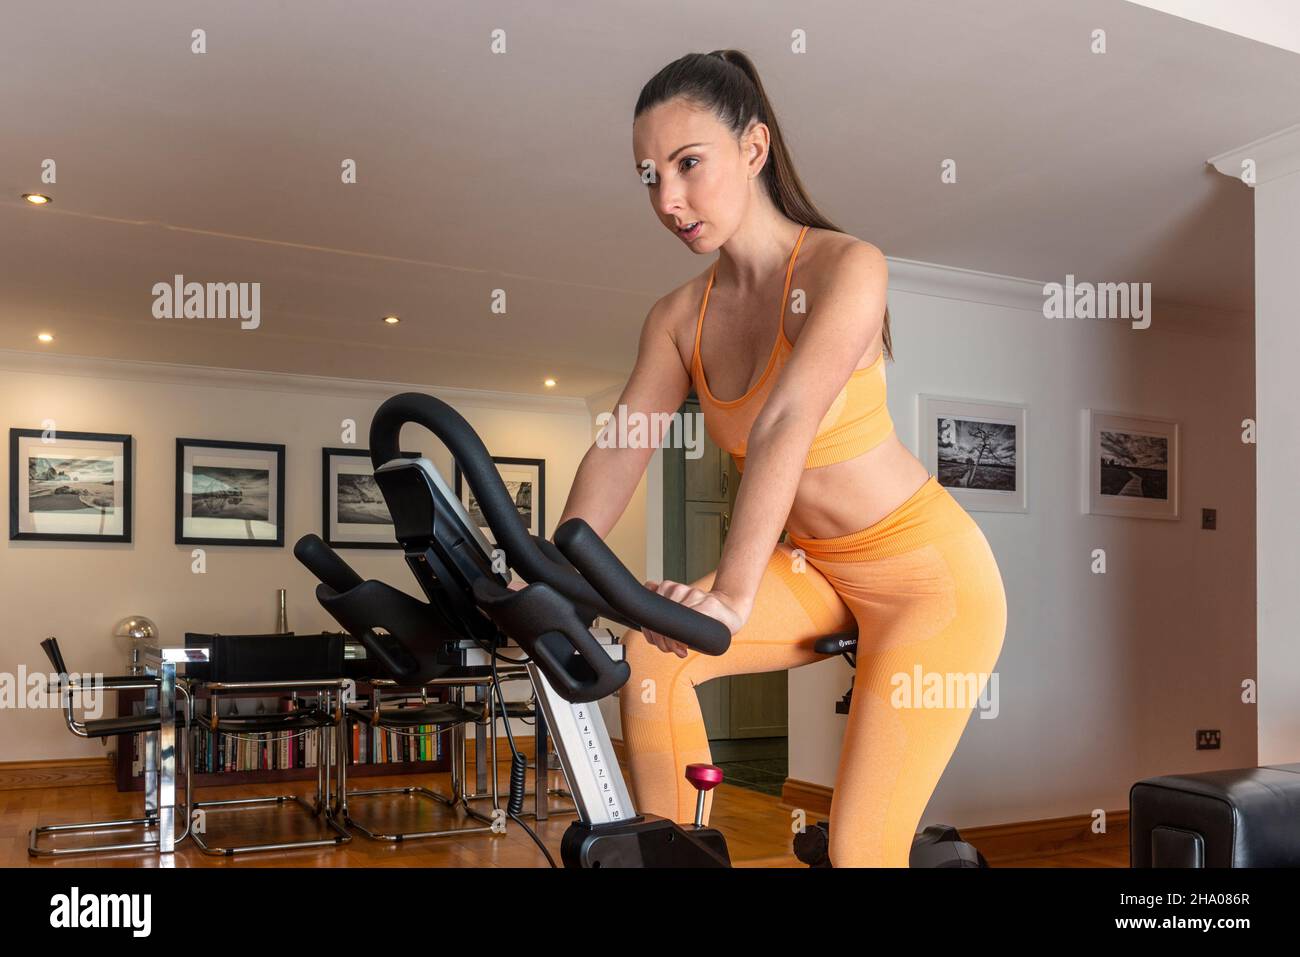 woman Exercising on Spin Bike in Home Stock Photo